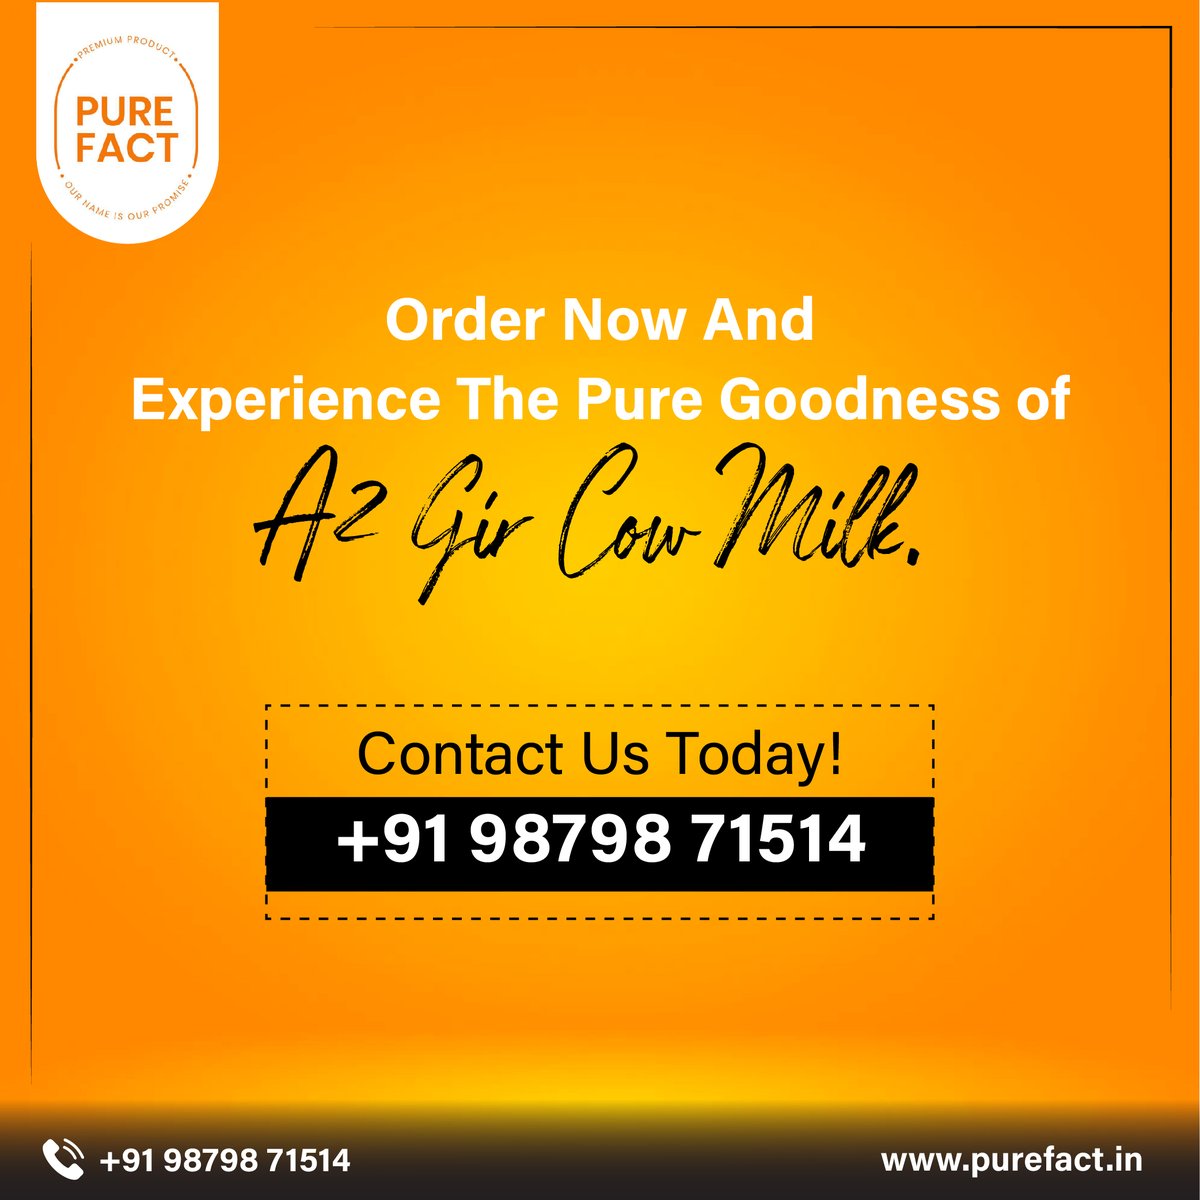 Unleash the PurePower of A2 Gir Cow Milk! Say goodbye to grocery store runs and relish the convenience of FREE home delivery. Order now!

Call or Whatsapp +91 98798 71514

#PureFact #A2milk #gircowA2milk #strength #health #glassbottles #freedelivery #farmfresh #pure #raw